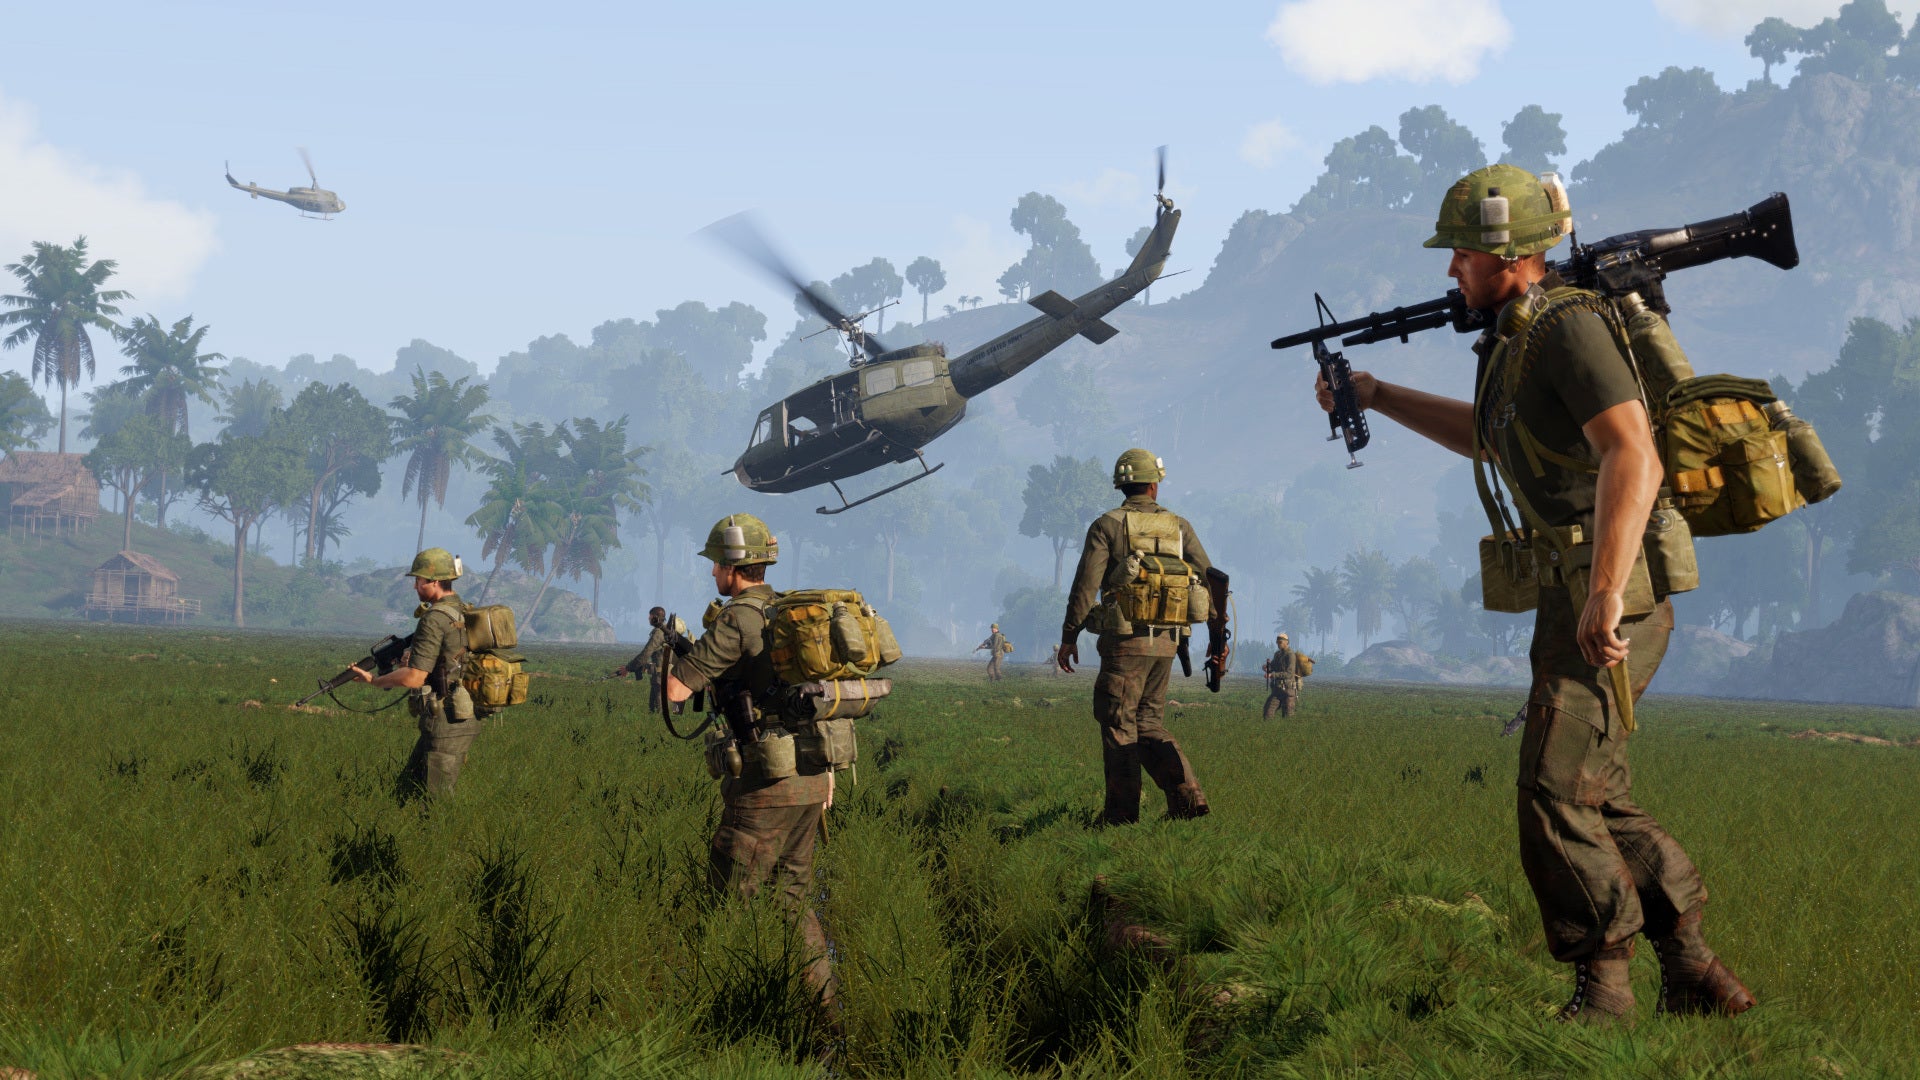 A sicrrenshot of Arma 3's Vietnam DLC. It shows a number of troops crossing a field, supported by two helicopters.